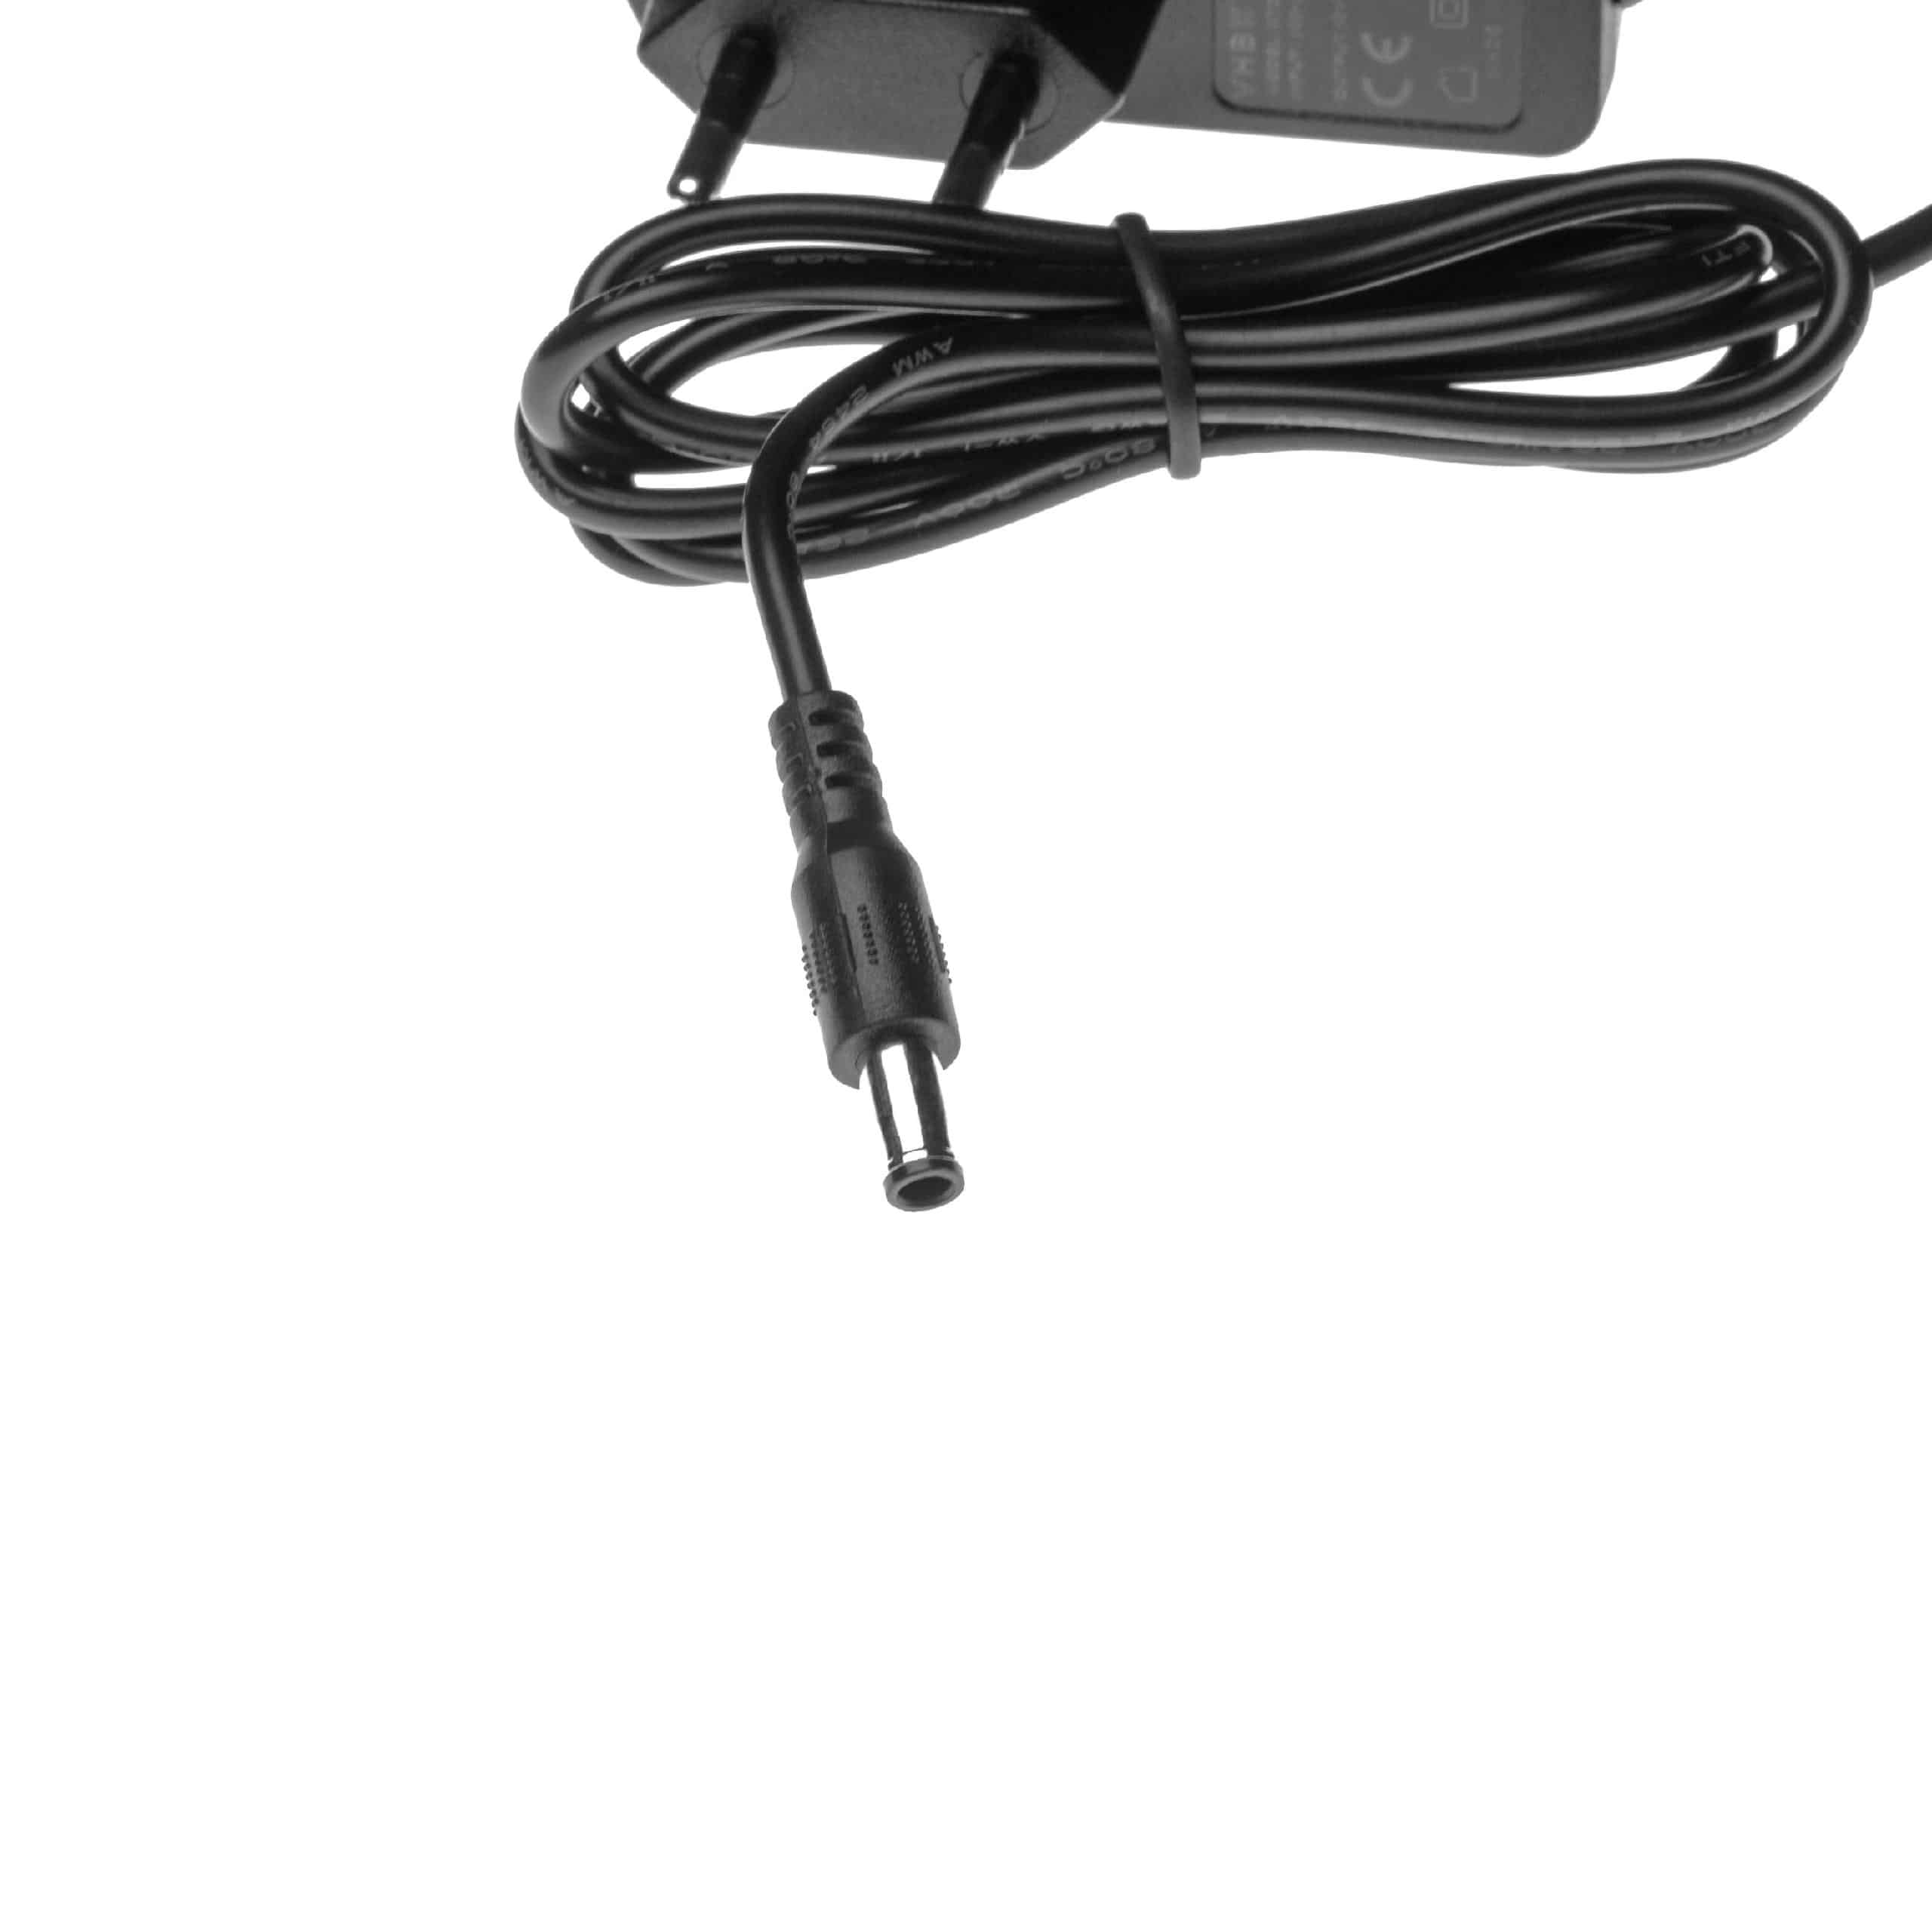 Mains Power Adapter replaces Philips LFH 0155, LFH0155 for Philips Dictaphone - DC 12 V / 1.25 A